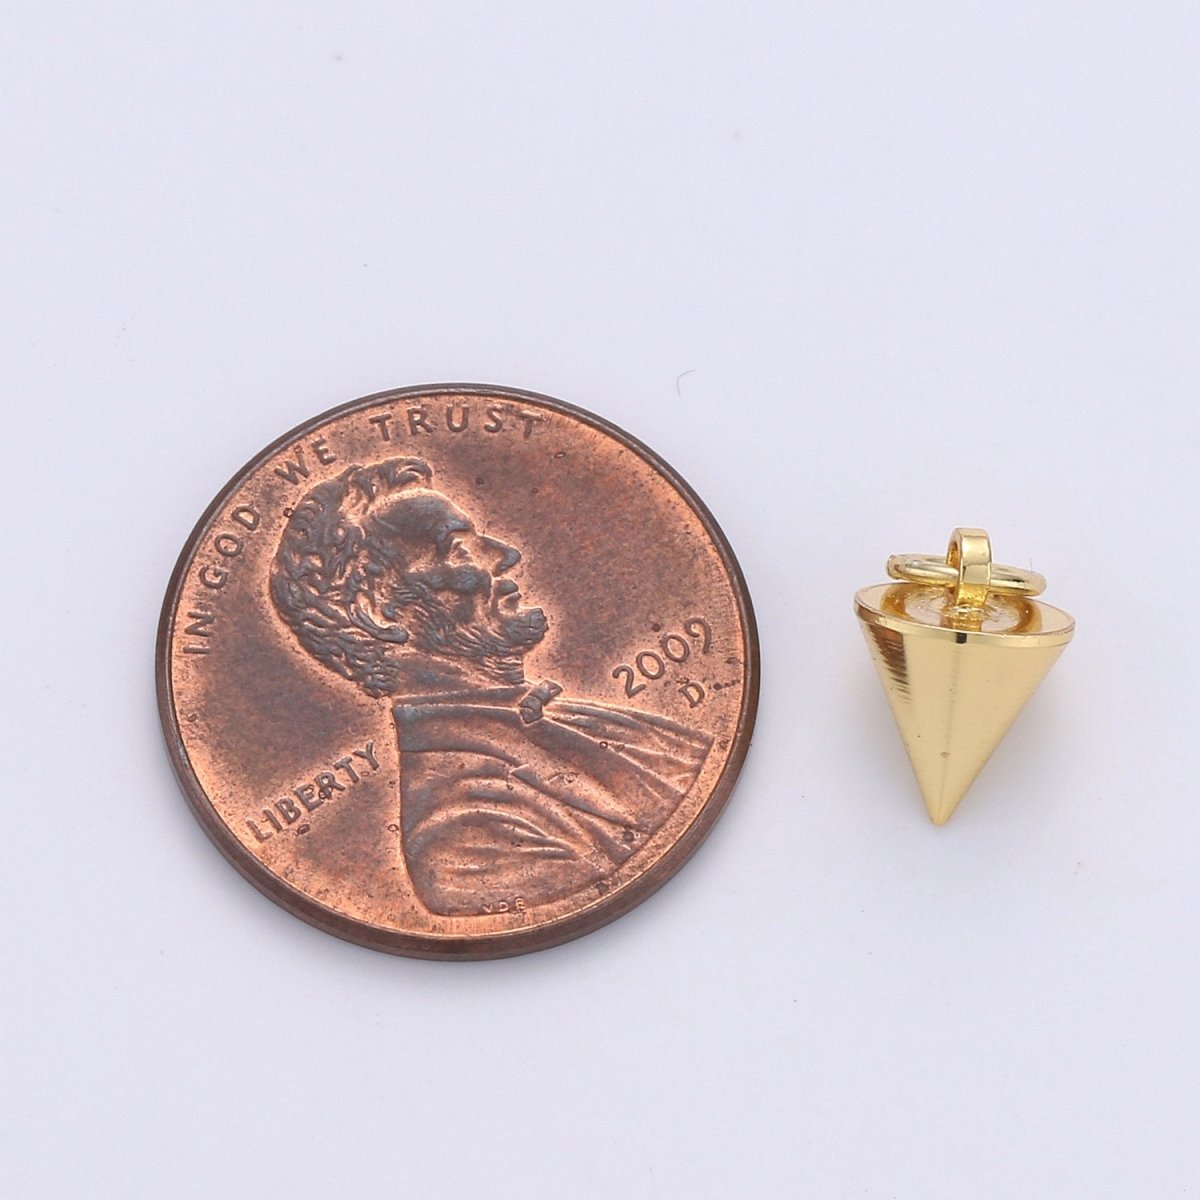 Dainty 24K Gold Filled Spike Charms,11x7mm Spike Pendants Conical Spike Charm,Drop Pendulum Pendant Stud Charm,Jewelry Finding K-800 - DLUXCA